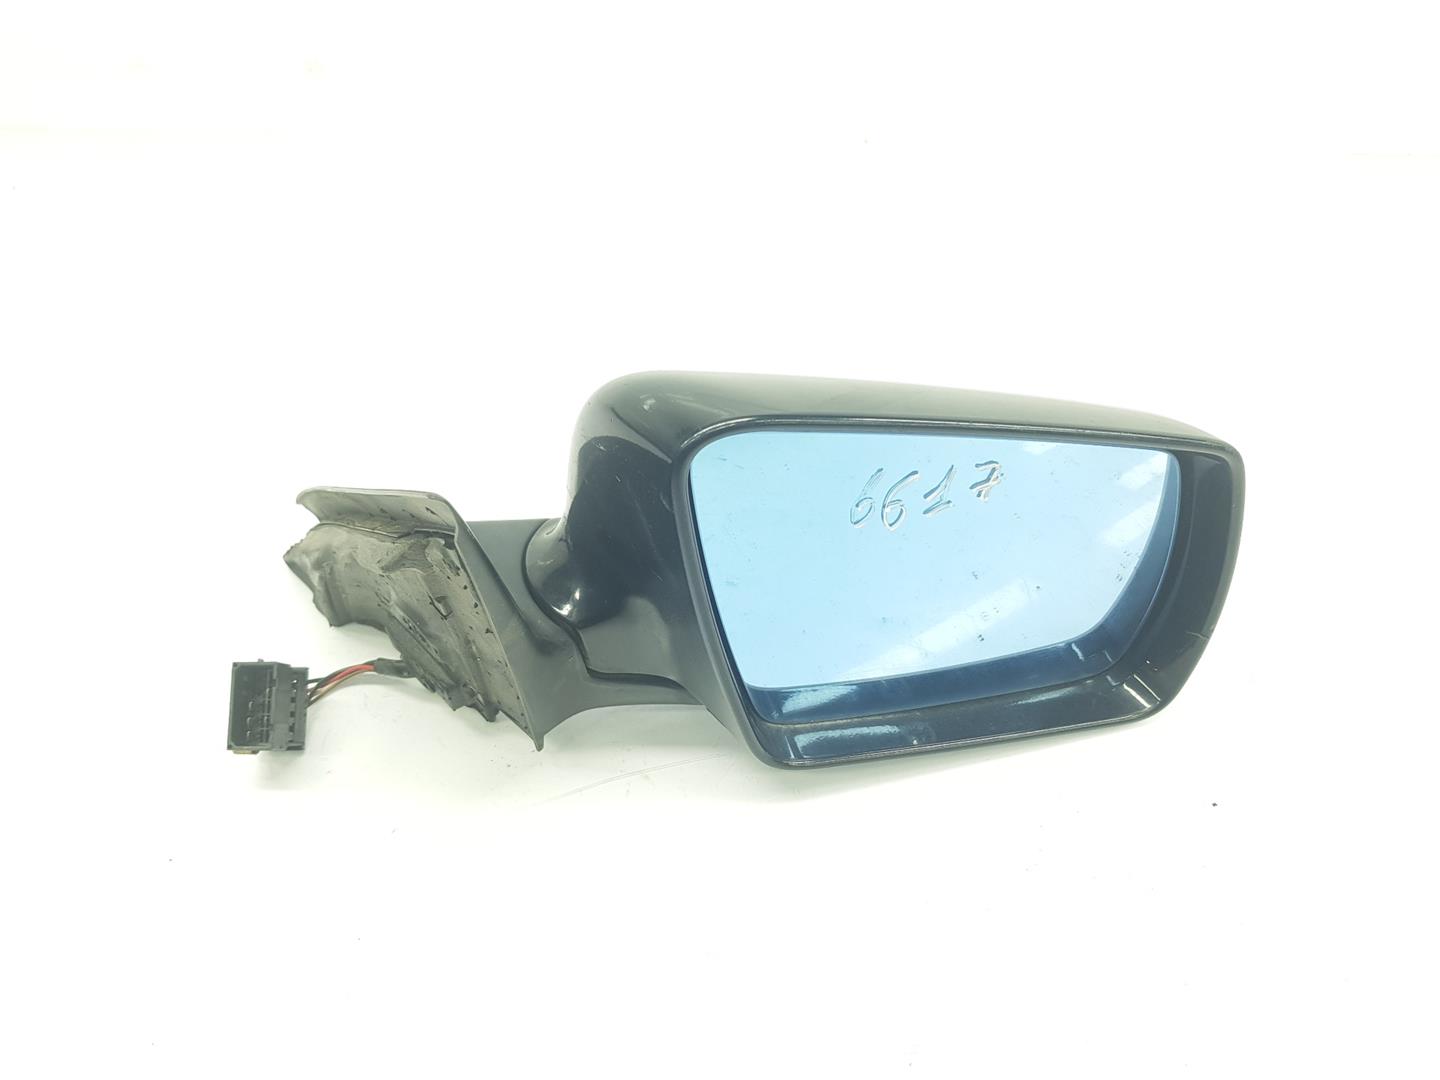 AUDI A6 allroad C5 (2000-2006) Right Side Wing Mirror 4Z7858532A, 4Z7858532A 24233110